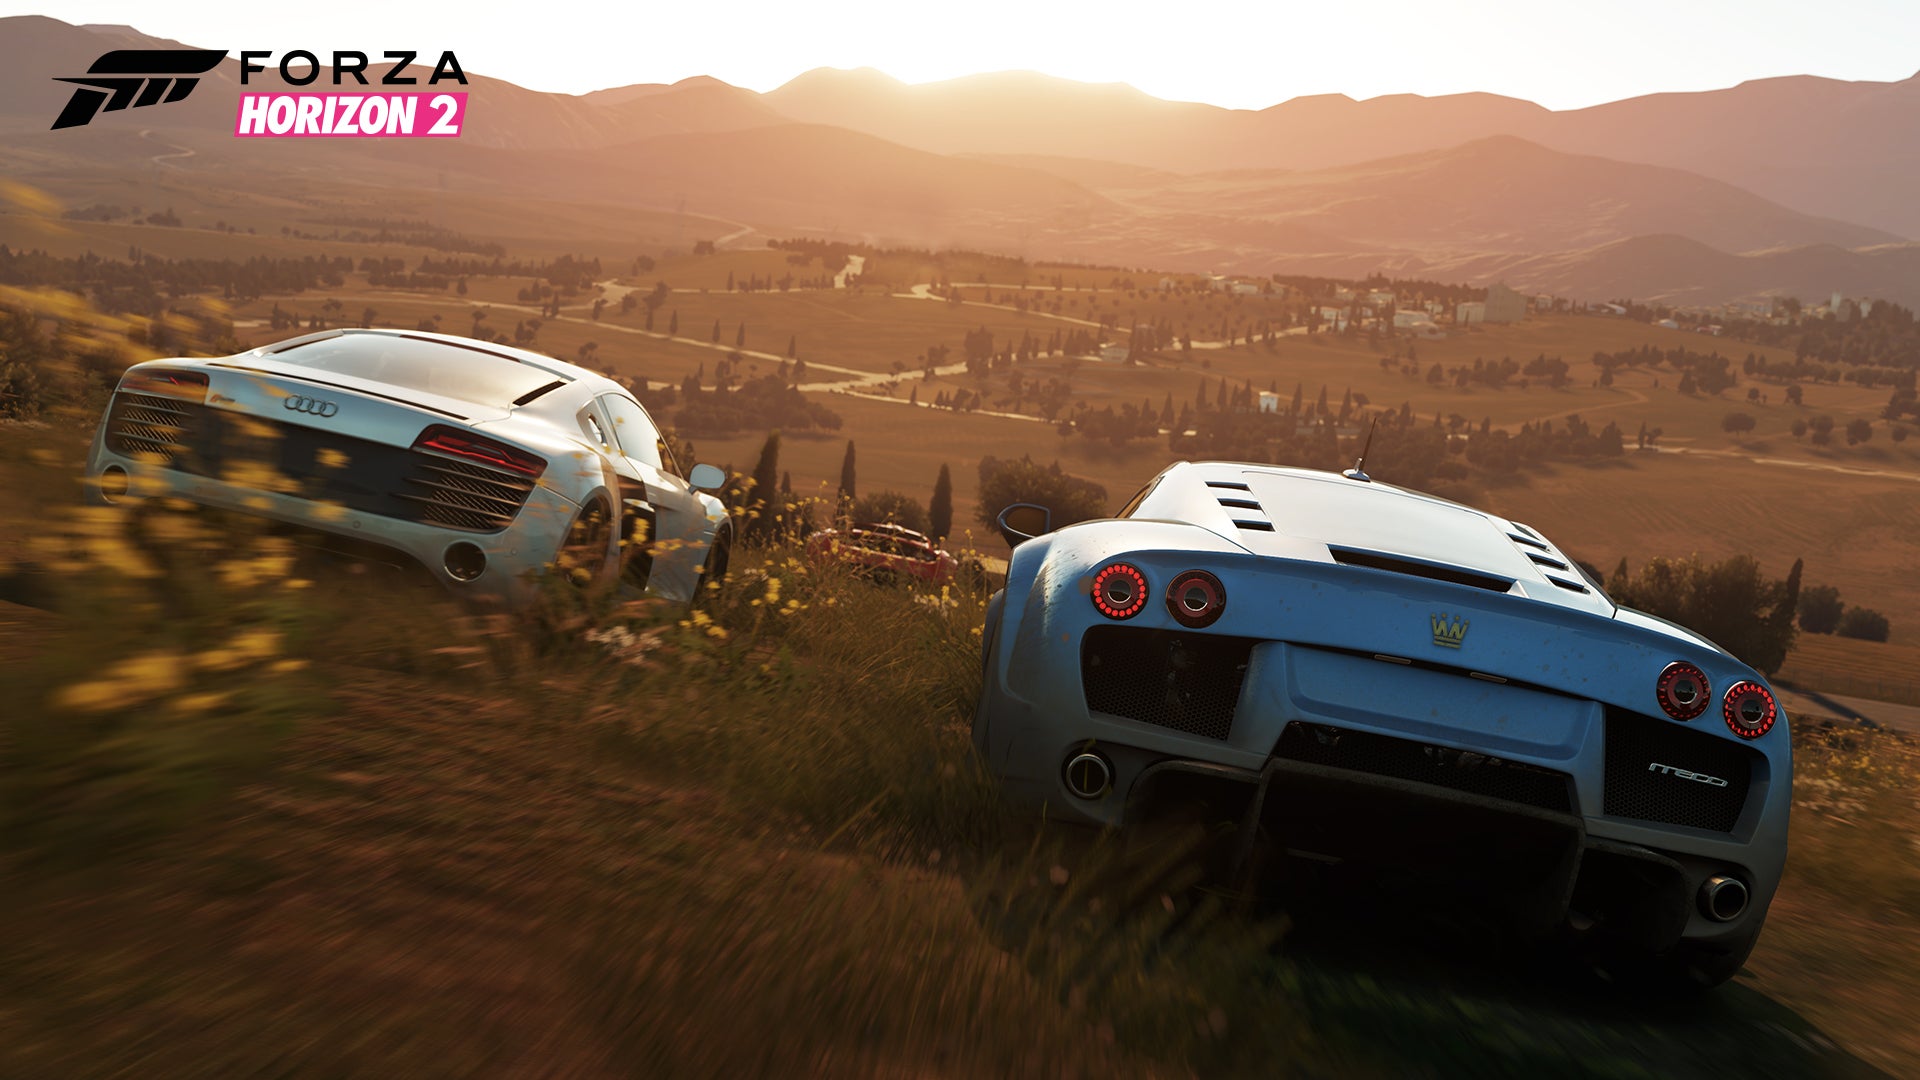 Forza Horizon 2 Xbox One Review: One of the All-Time Great Racers | VG247